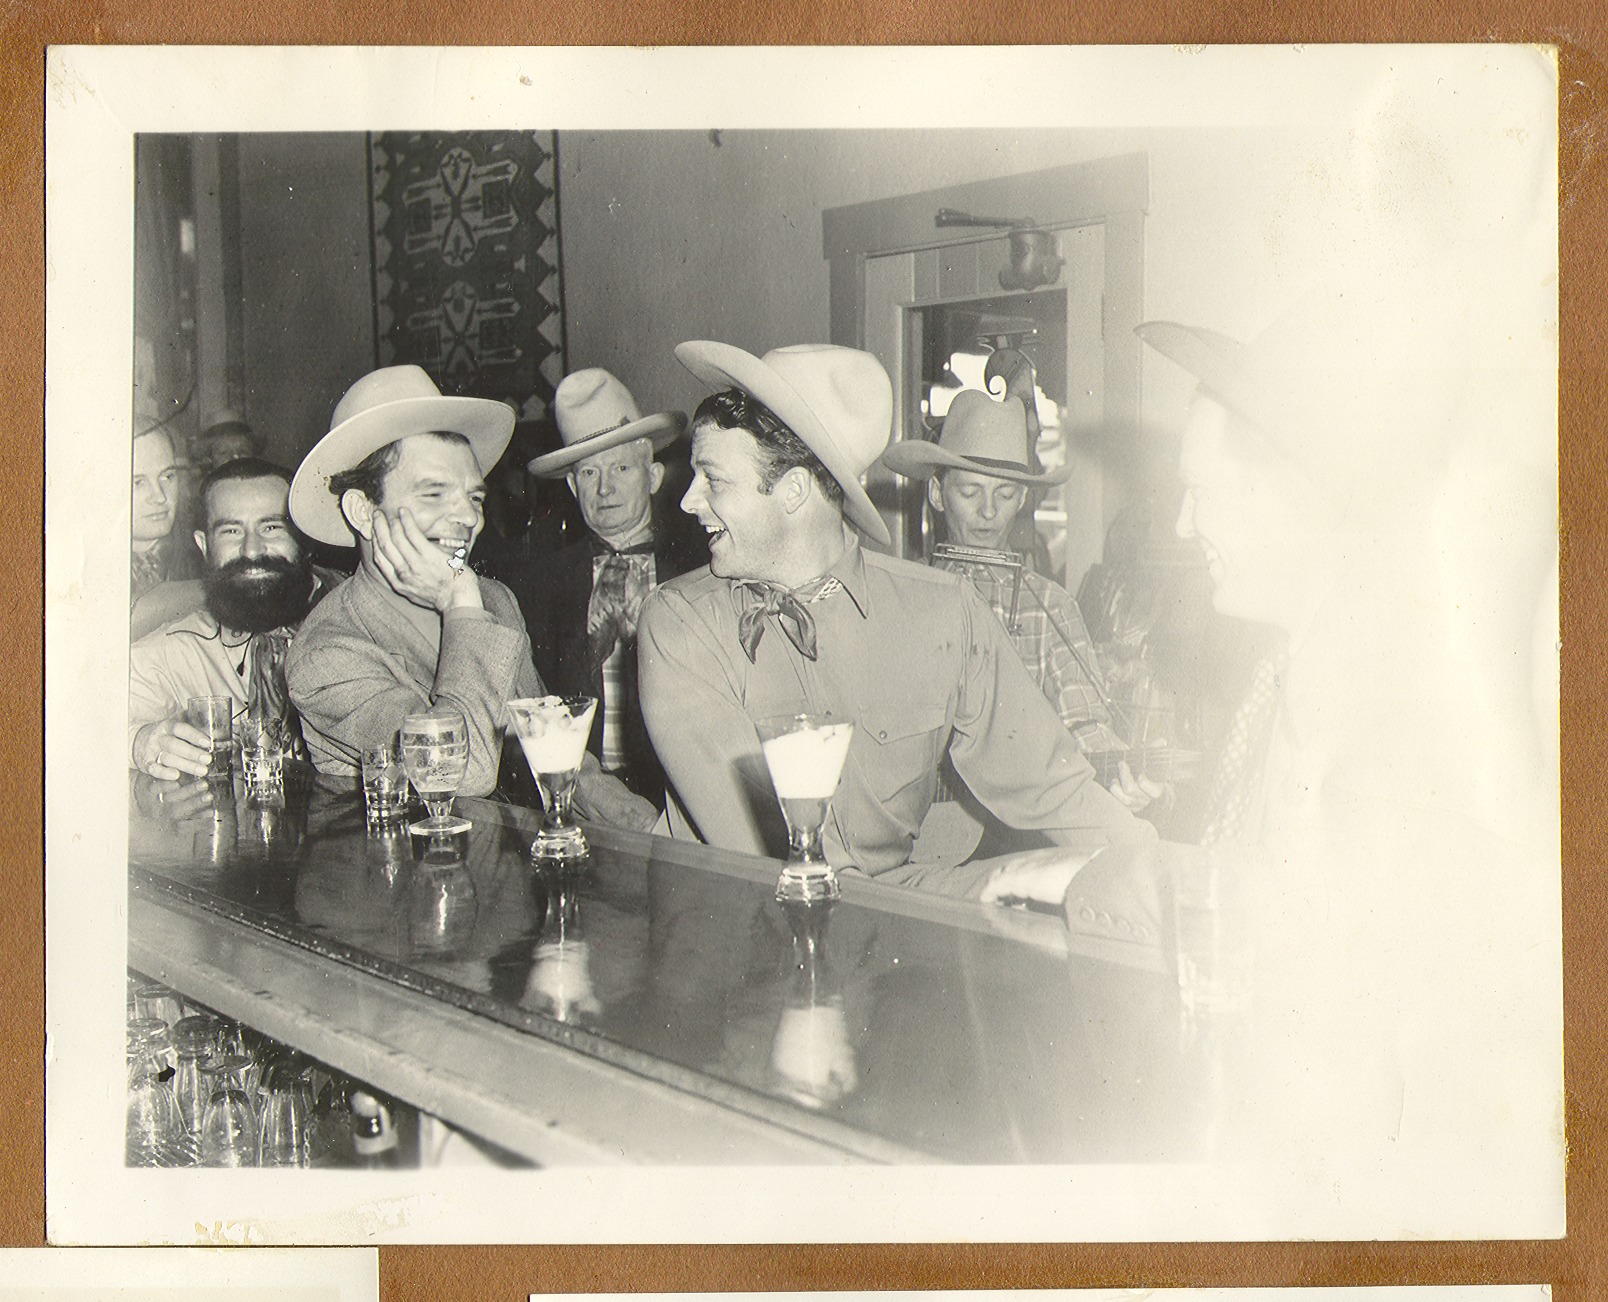 Rex Bell, Curley Fletcher, and  men seated at the bar at the ranch, having drinks: photographic print